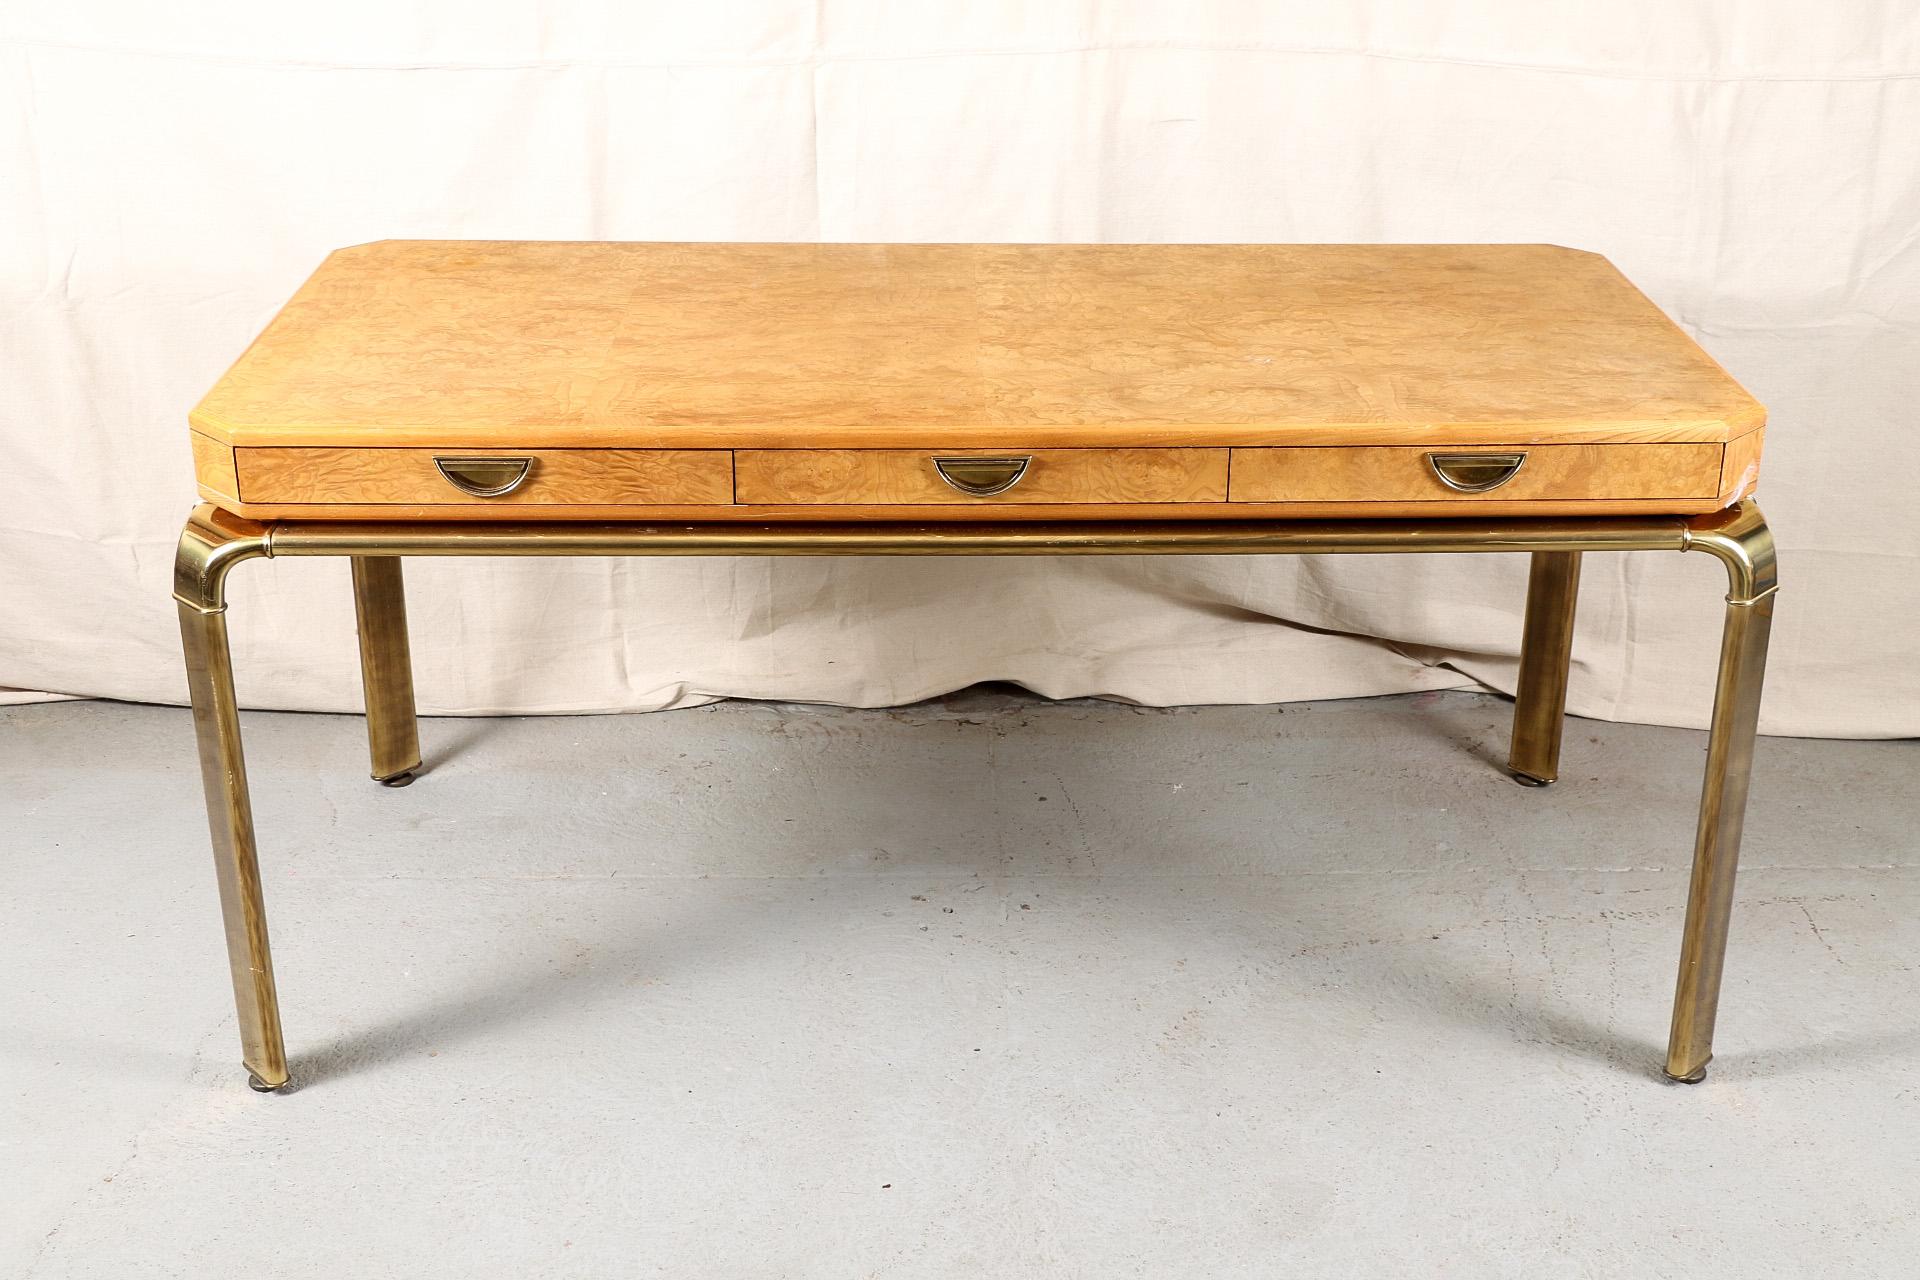 John Widdicomb modern desk, pale burled wood top with canted corners, three frieze drawers with brass pulls, mounted on a brass frame with flat canted curved legs. 

Condition: Some tarnish to brass accents otherwise good.